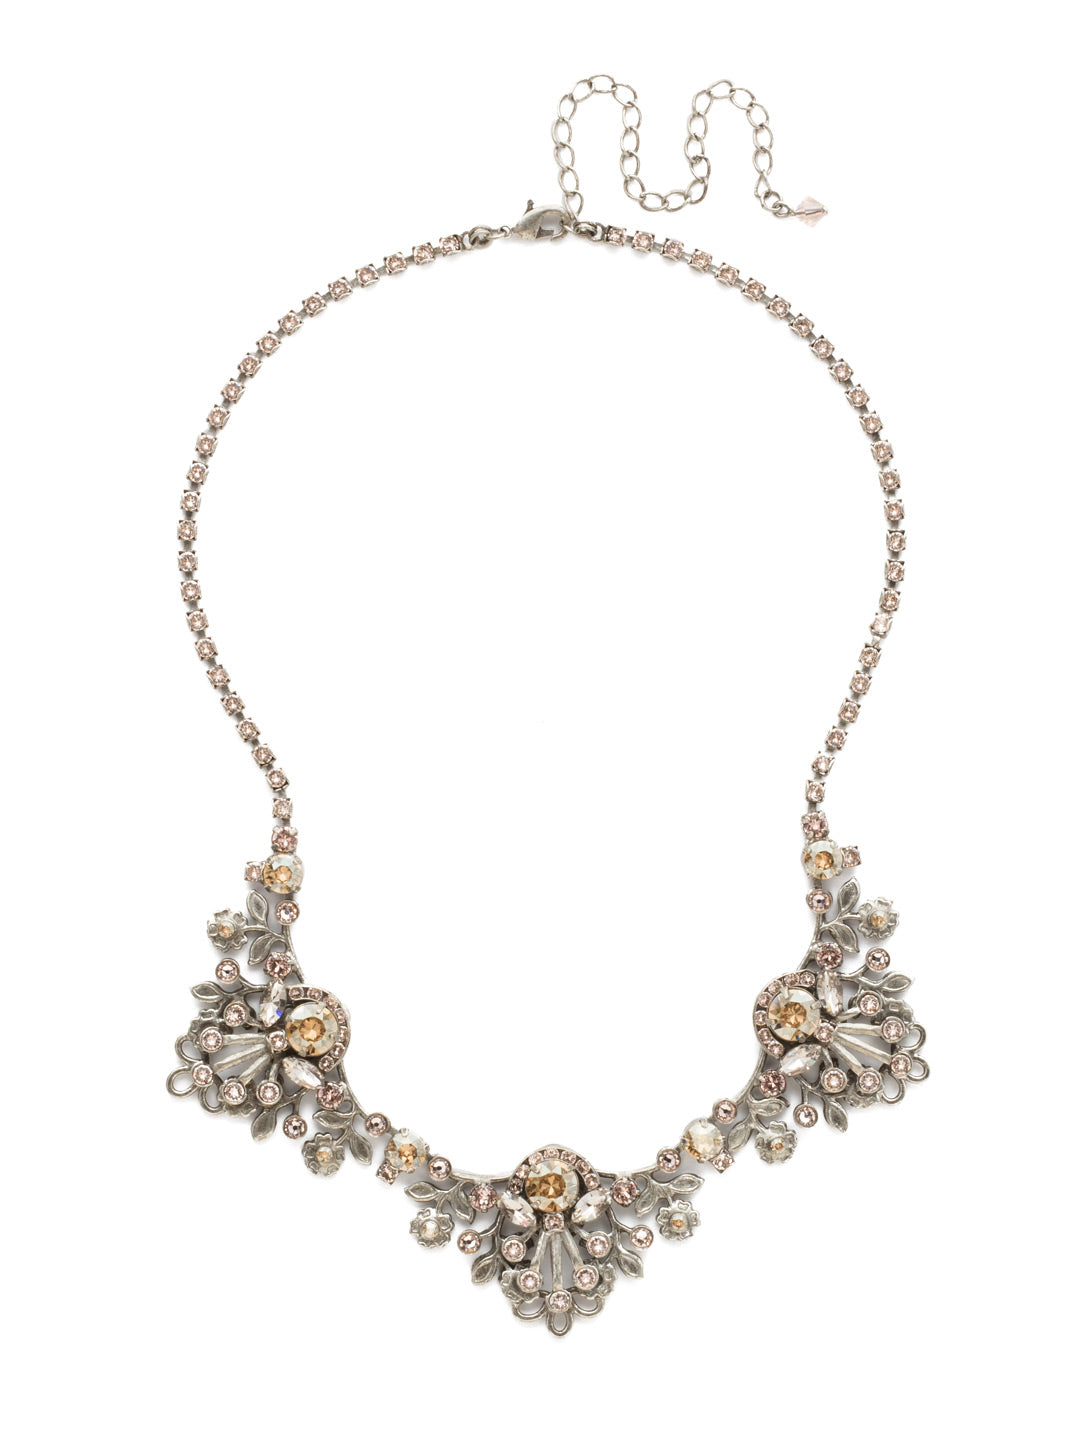 Linden Statement Necklace - NDT18ASSBL - <p>Feminine, floral metalwork is accented with a mixture of round and navette crystals. From Sorrelli's Satin Blush collection in our Antique Silver-tone finish.</p>